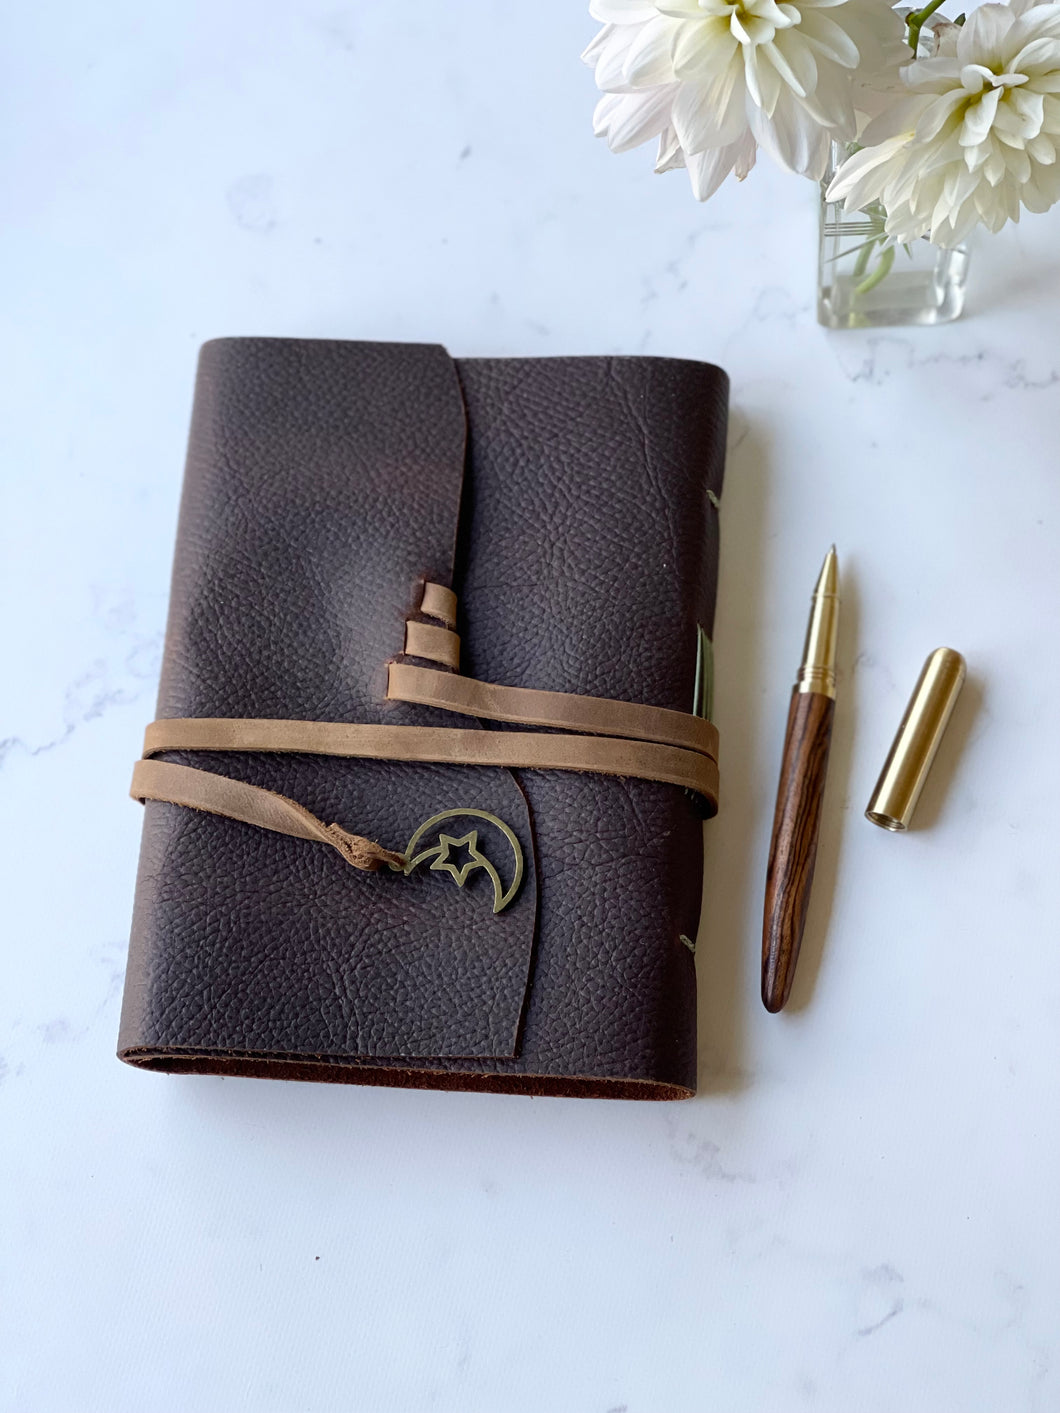 Notebook Brown Leather with Leather Strap Handmade